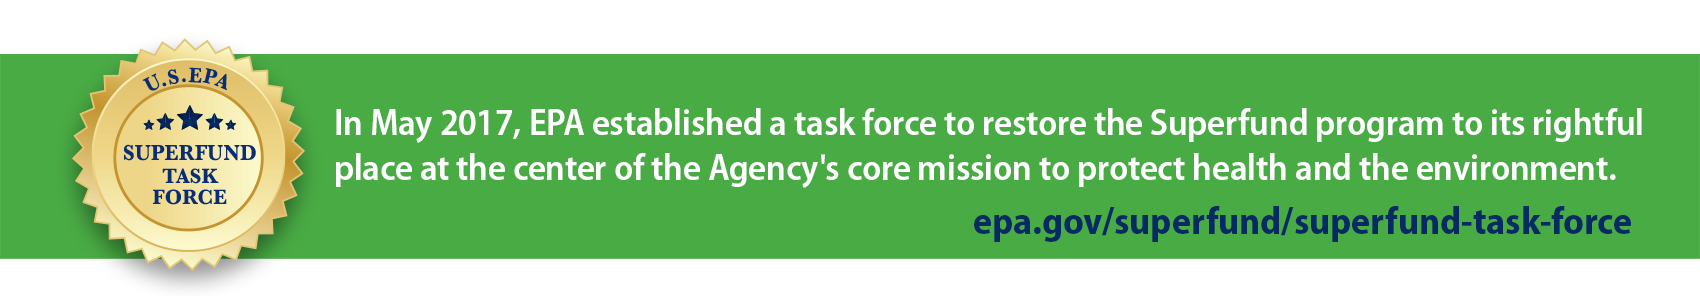 Superfund Task Force. In May 2017 EPA established a task force to restore the Superfund program to its rightful place at the center of the Agency's core mission to protect health and the environment. epa.govhttps://www.epa.gov/superfund/superfund-task-force.